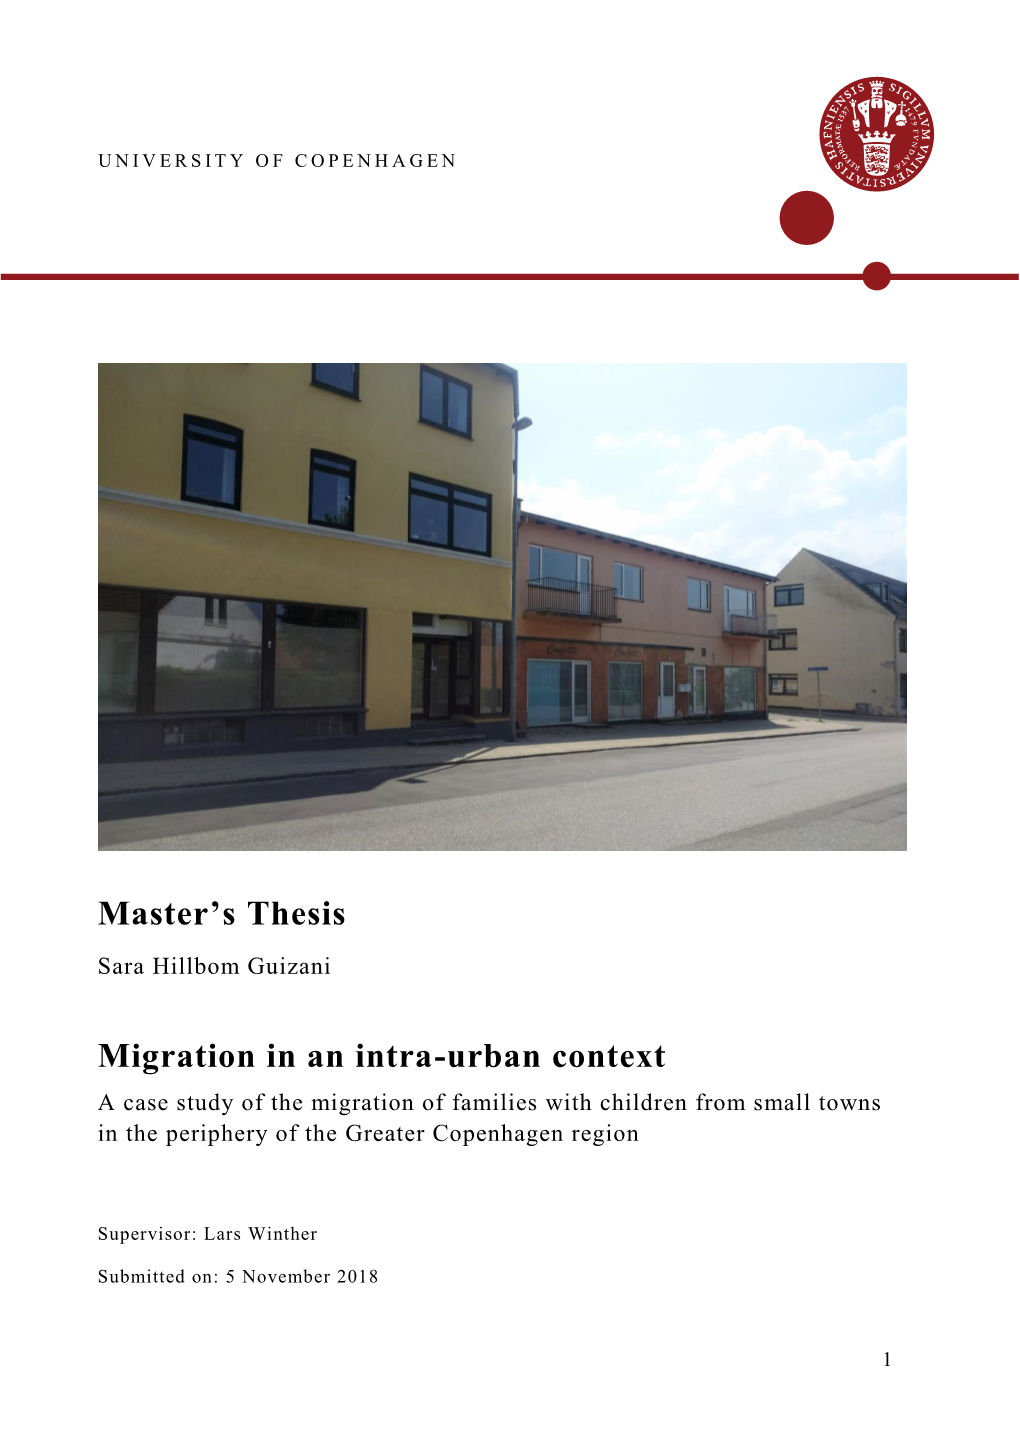 Migration in an Intra-Urban Context a Case Study of the Migration of Families with Children from Small Towns in the Periphery of the Greater Copenhagen Region